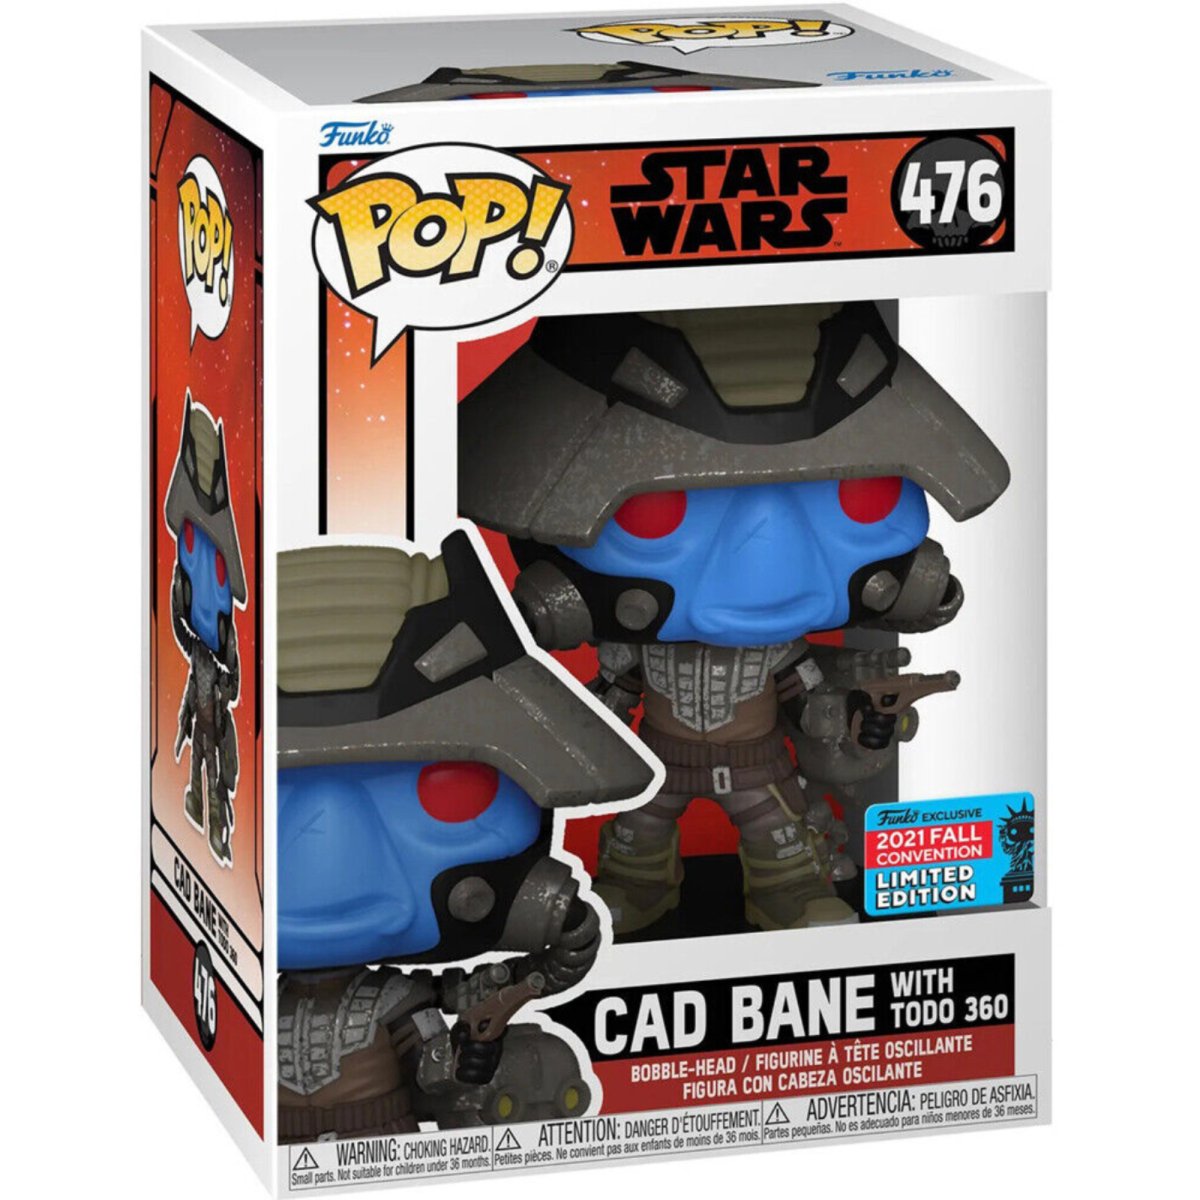 Star Wars - Cad Bane with Todo 360 (2021 Fall Convention Limited Edition) #476 - Funko Pop! Vinyl Star Wars - Persona Toys